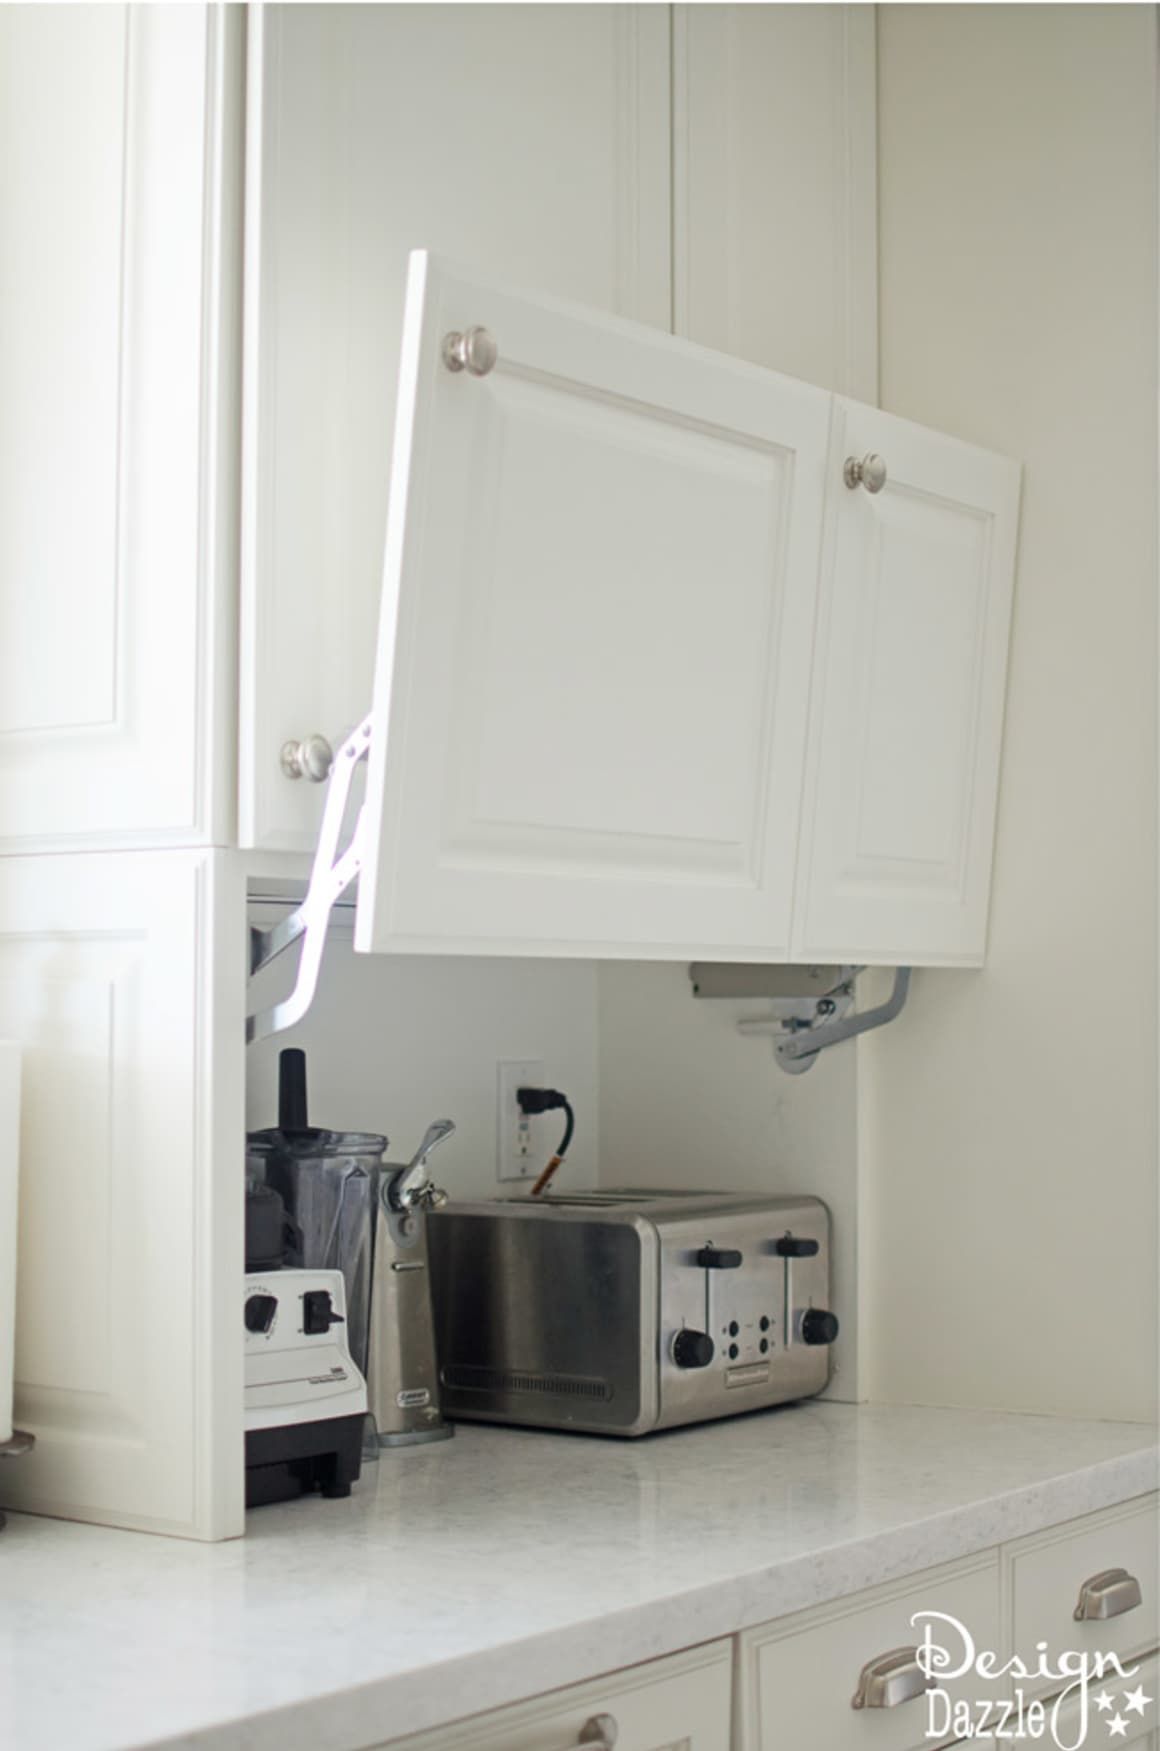 Making the Most of Limited Space: Creative Solutions for Small Kitchens